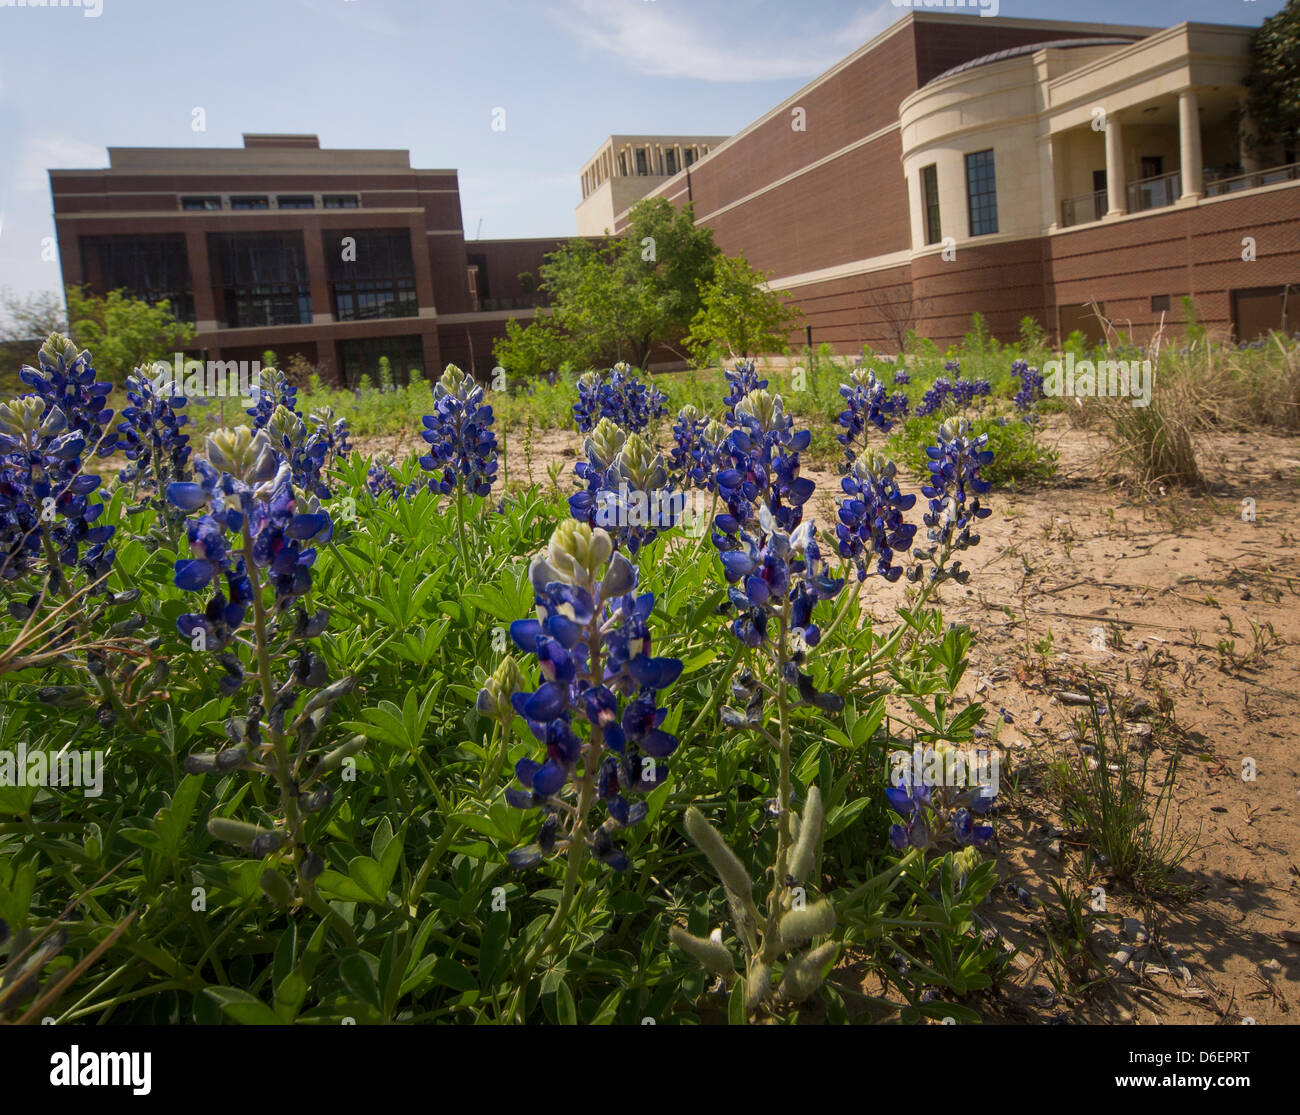 George W Bush Presidential Library features wild flowers and long with memories of 911. Bluebonnets, the Texas state flower blooms in the 24-acre site. Stock Photo